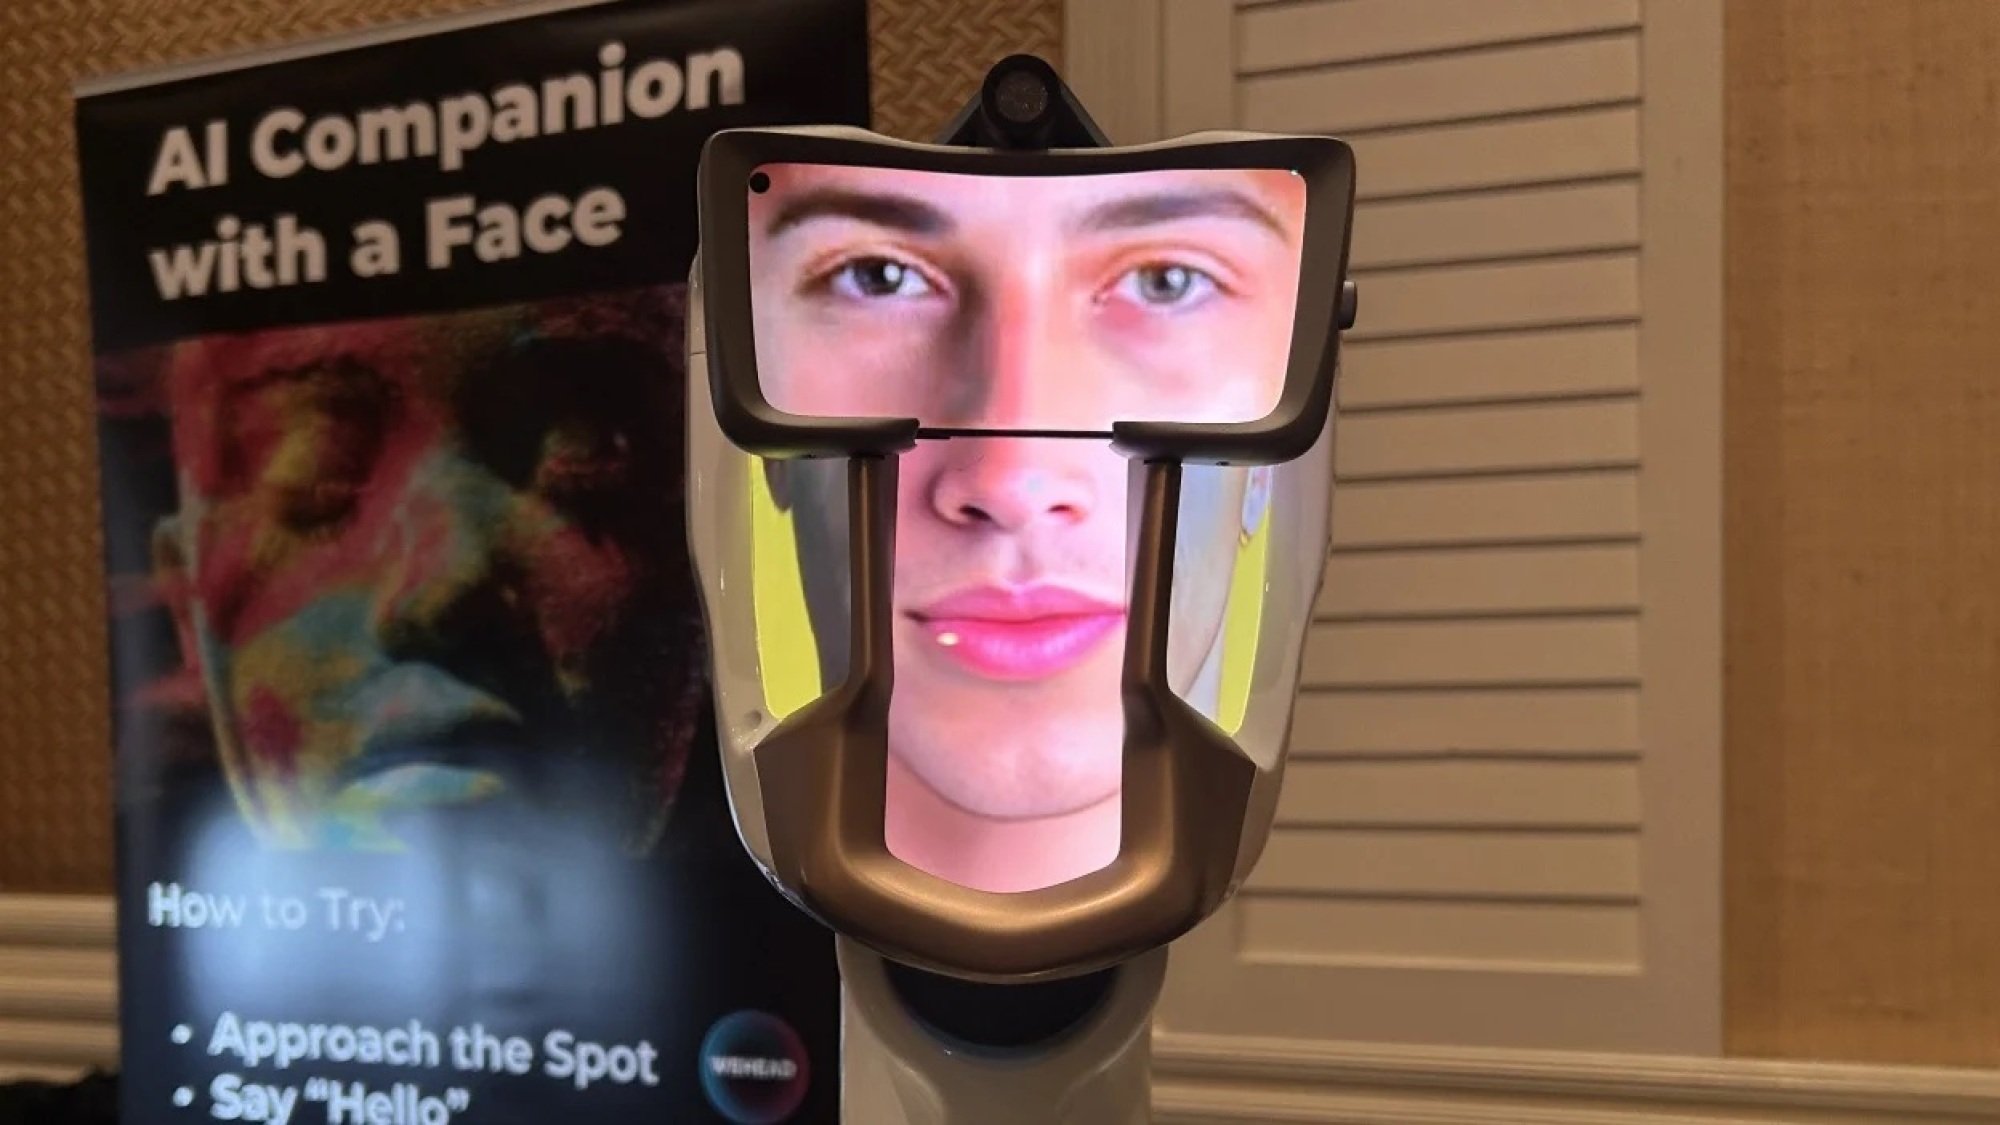 AI robotic head with photos of a face on the screen